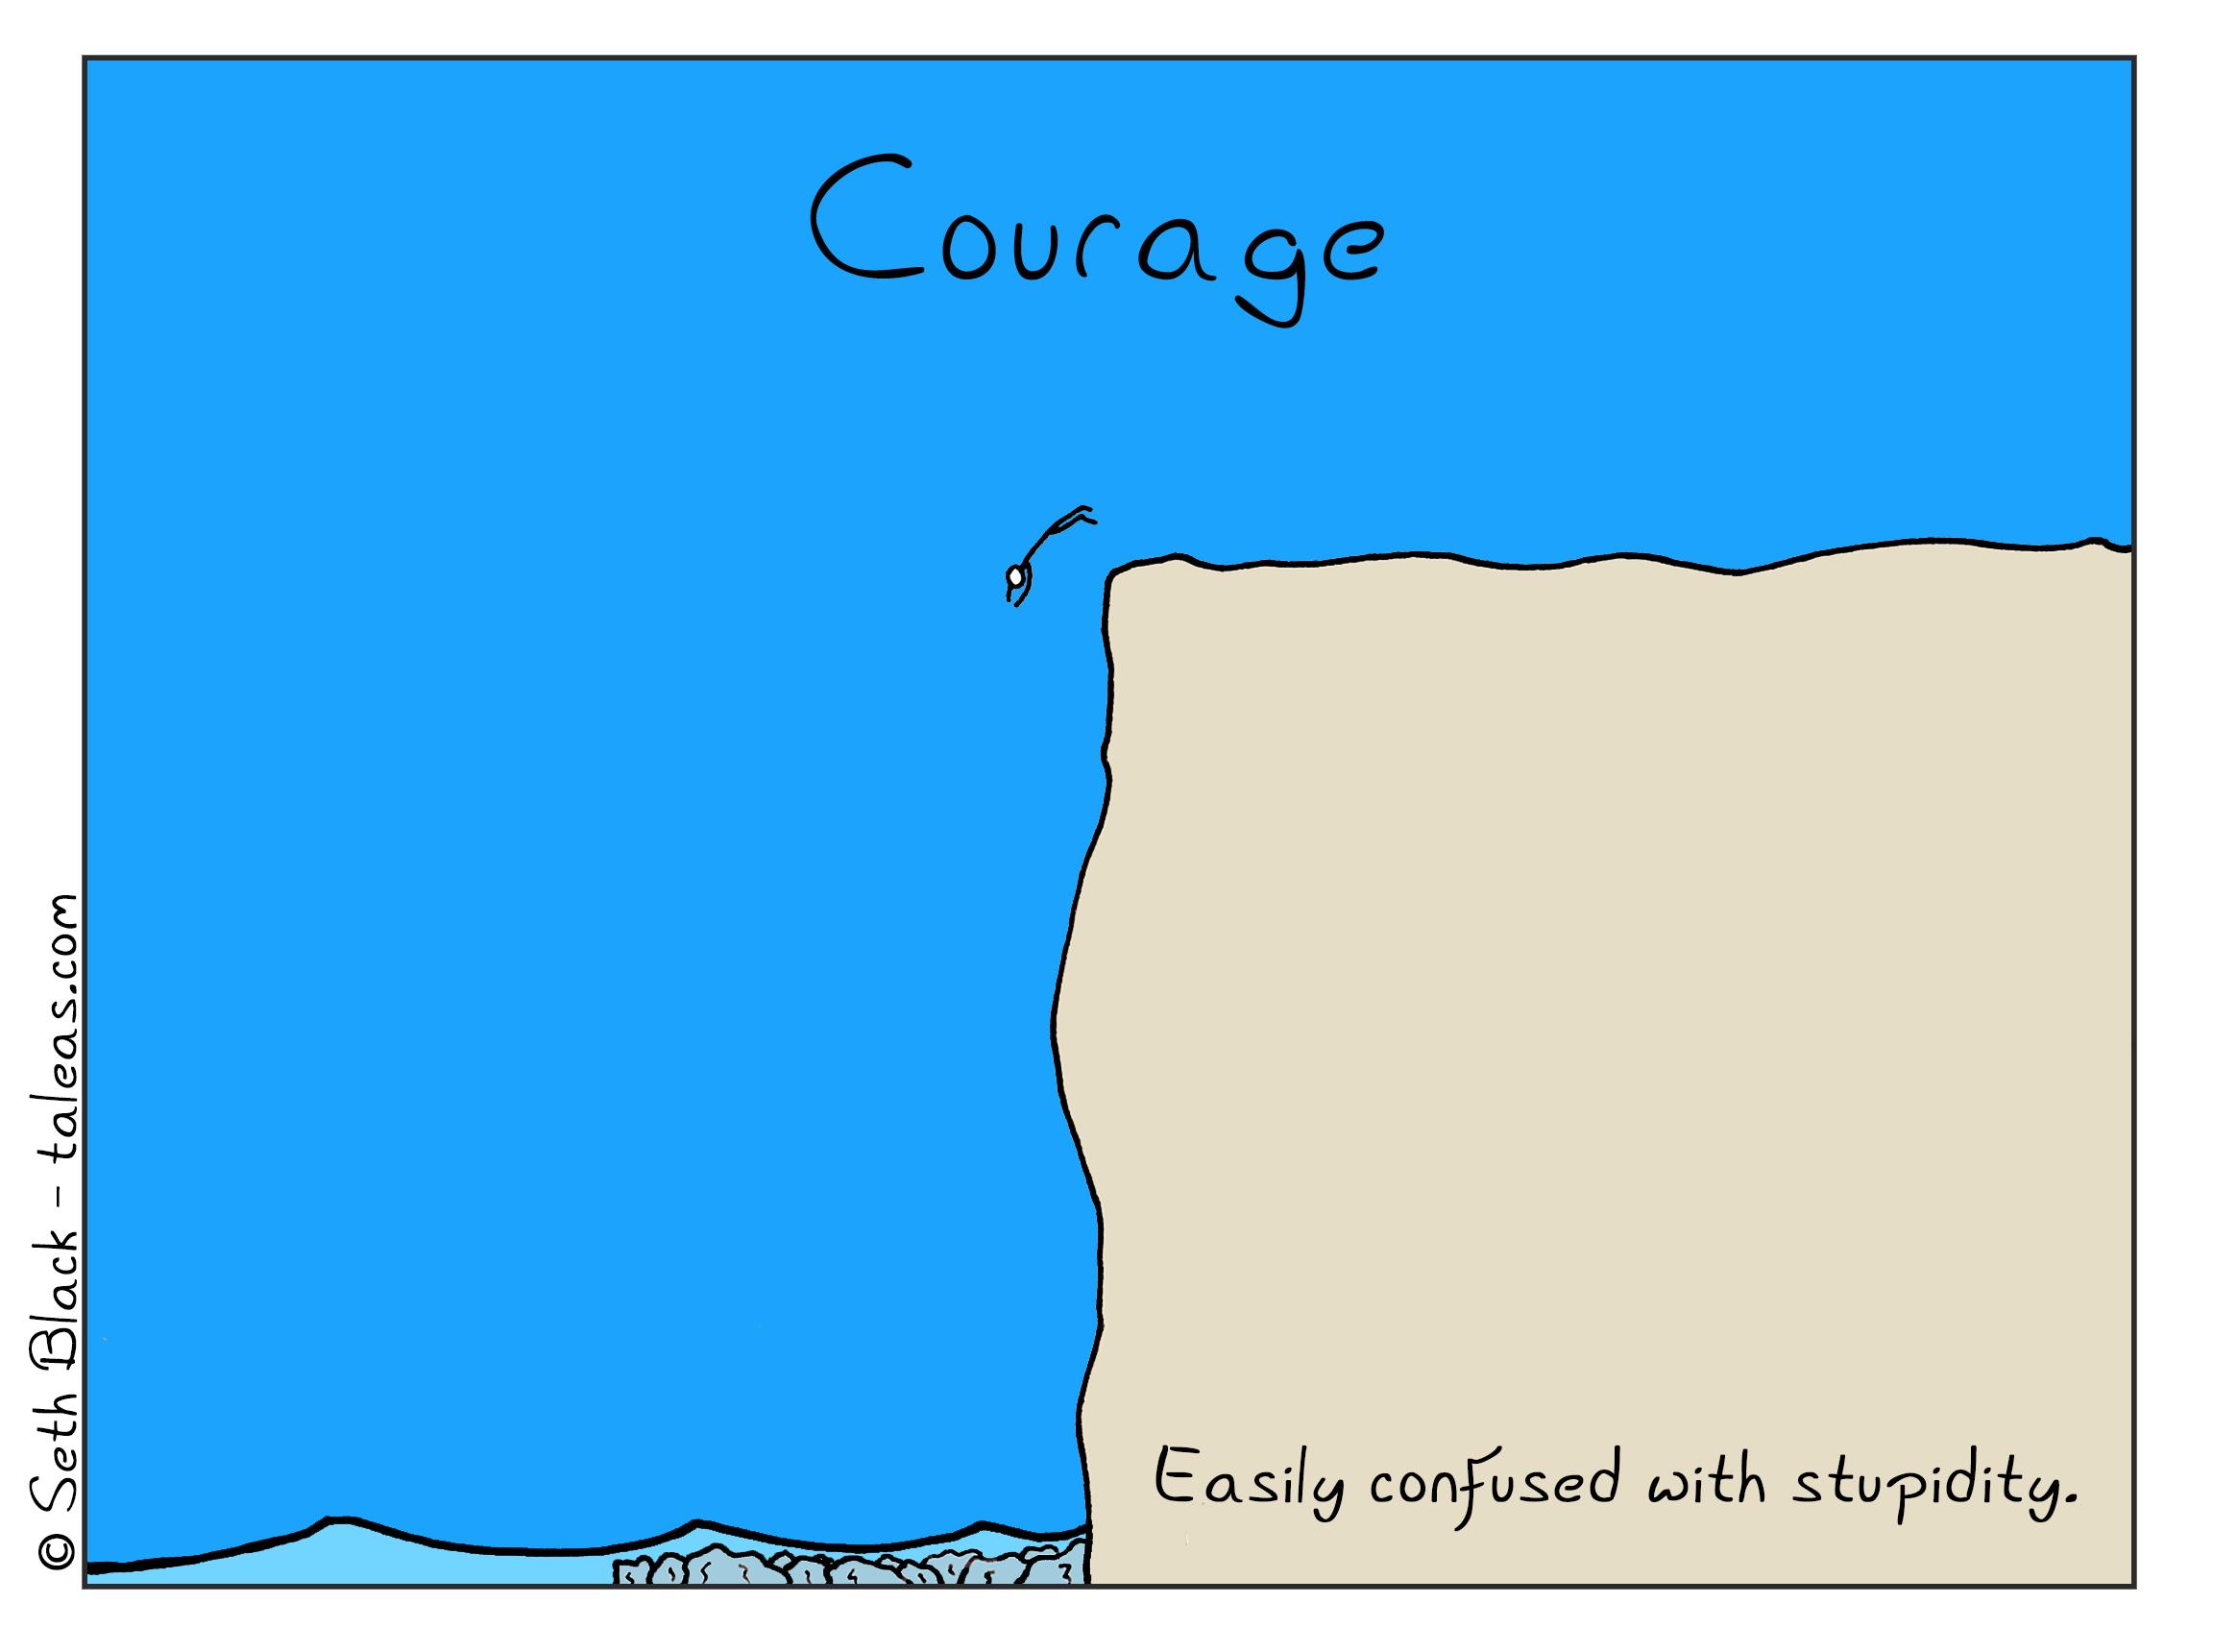 A stick figure jumps off a cliff into very shallow water with rocks. "Courage: easily confused with stupidity"